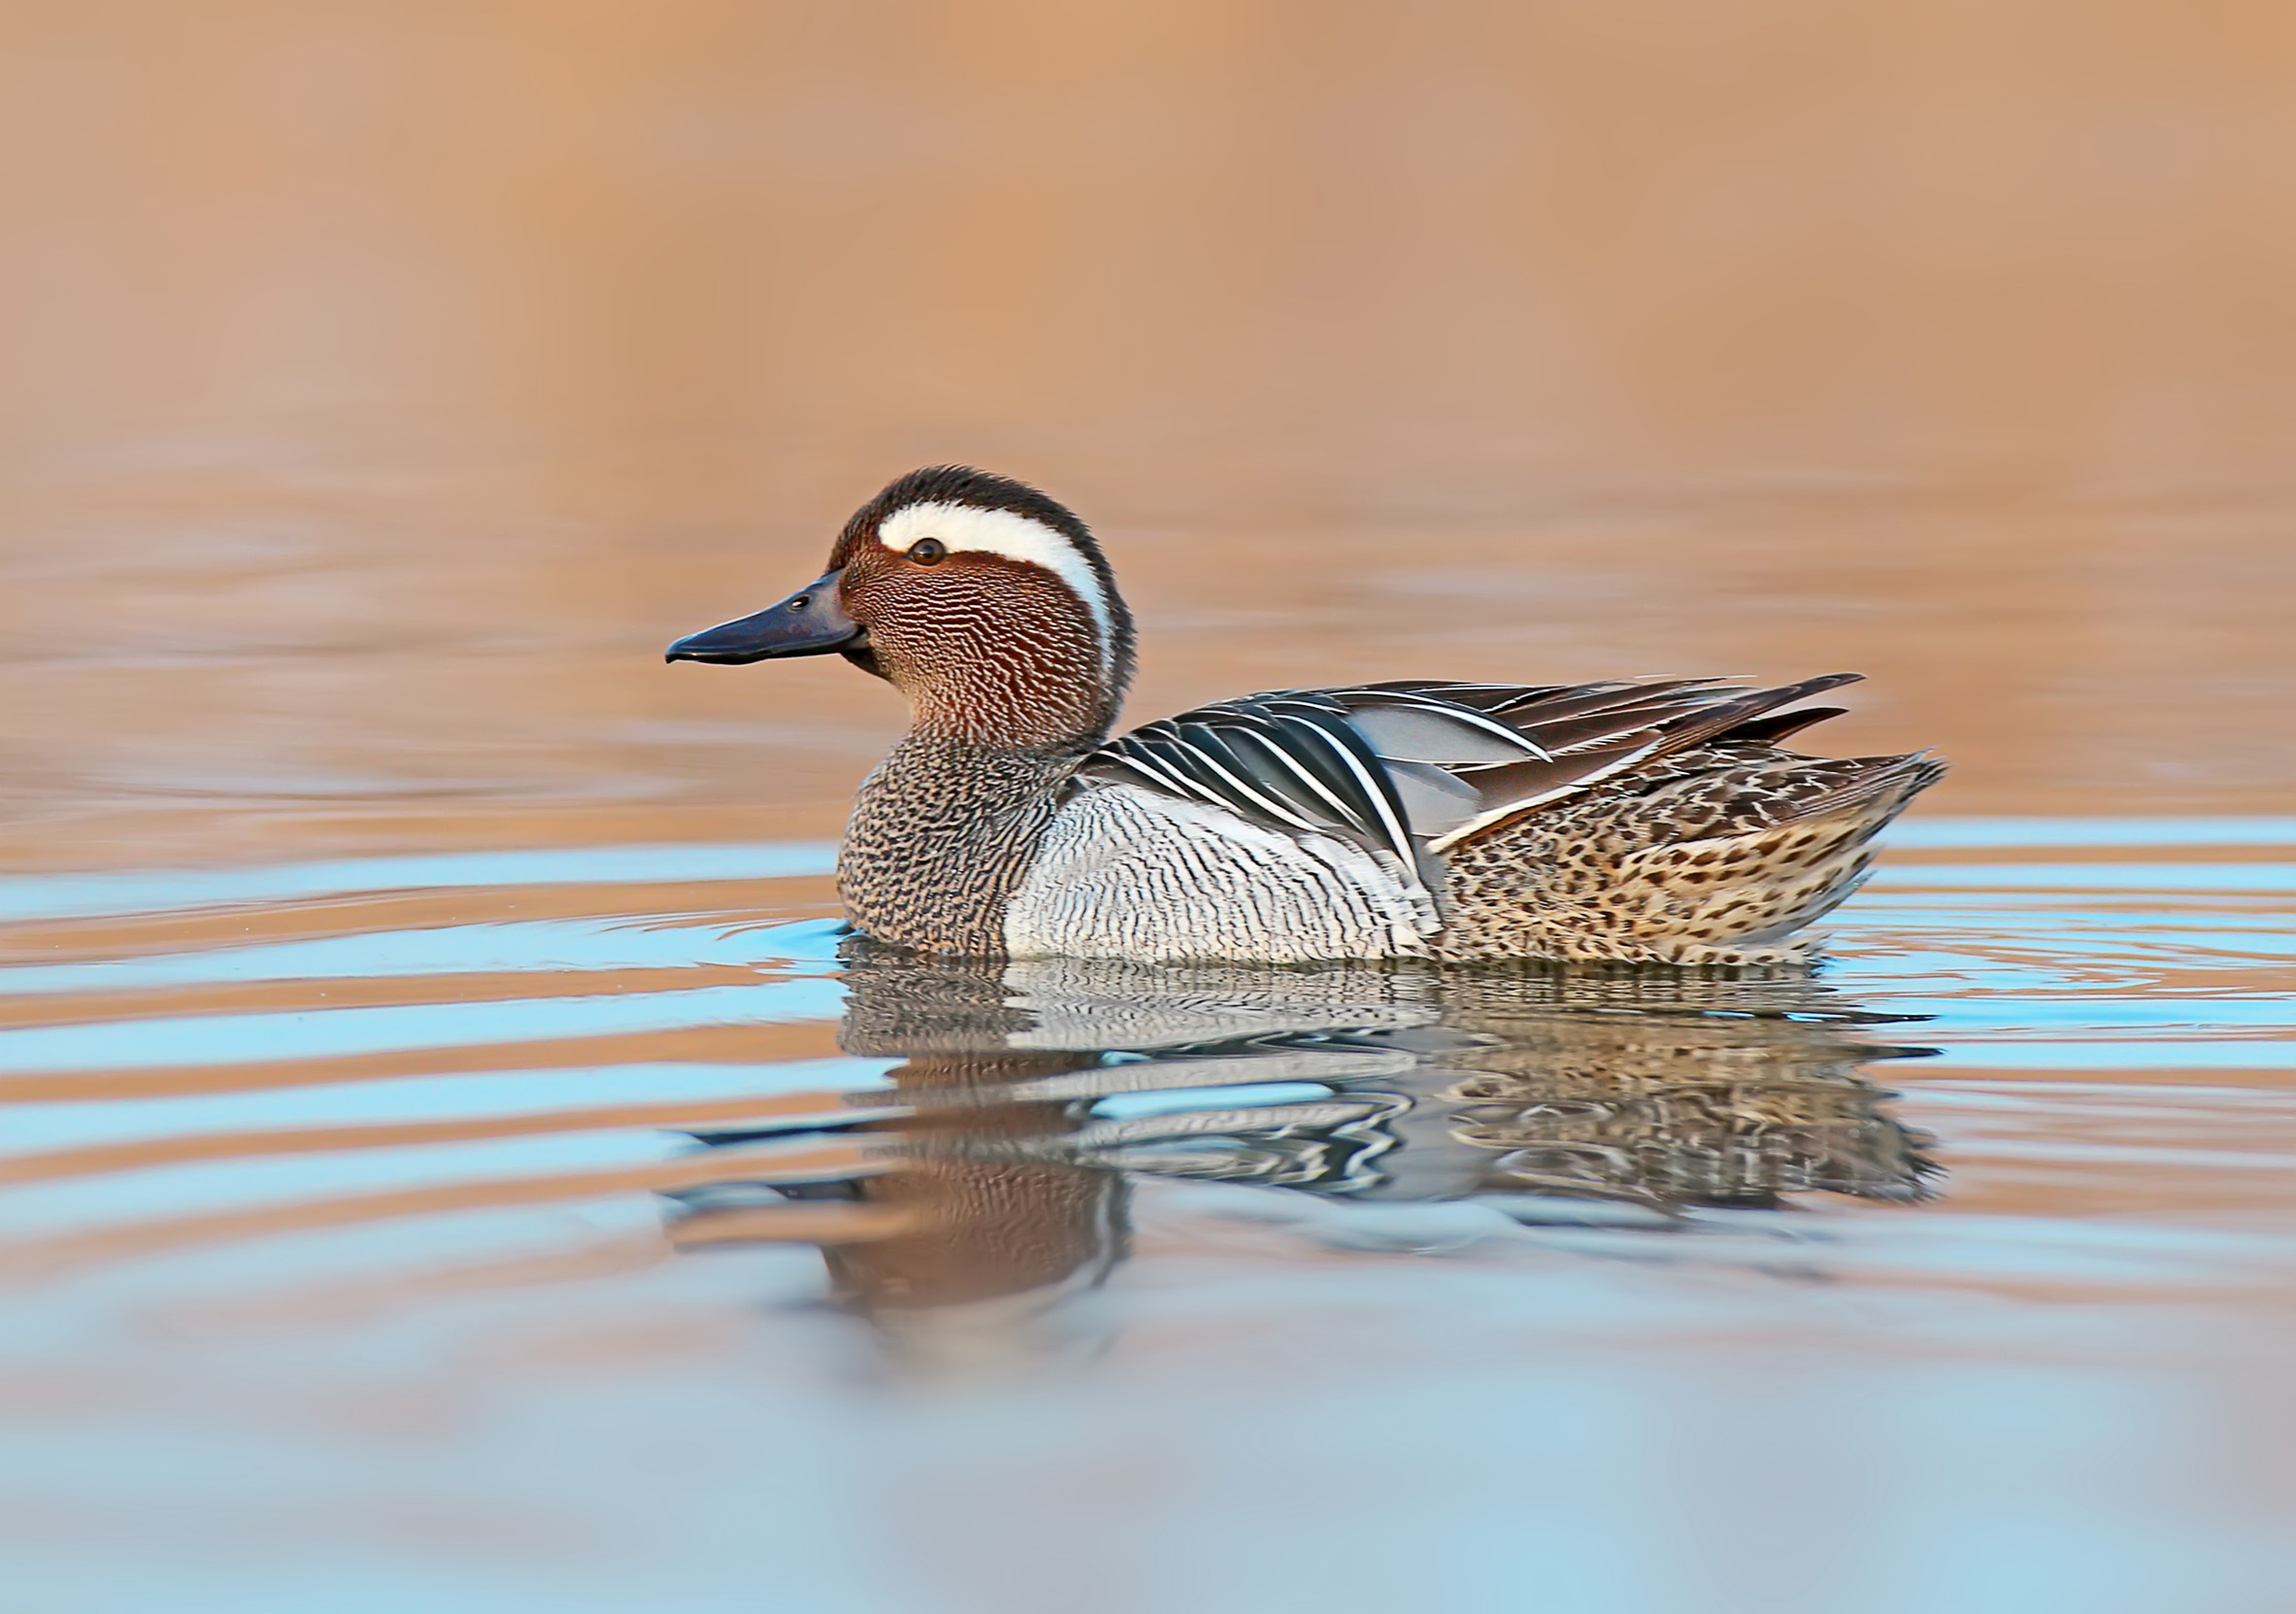 Male Garganey duck swimming on calm blue and orange water.